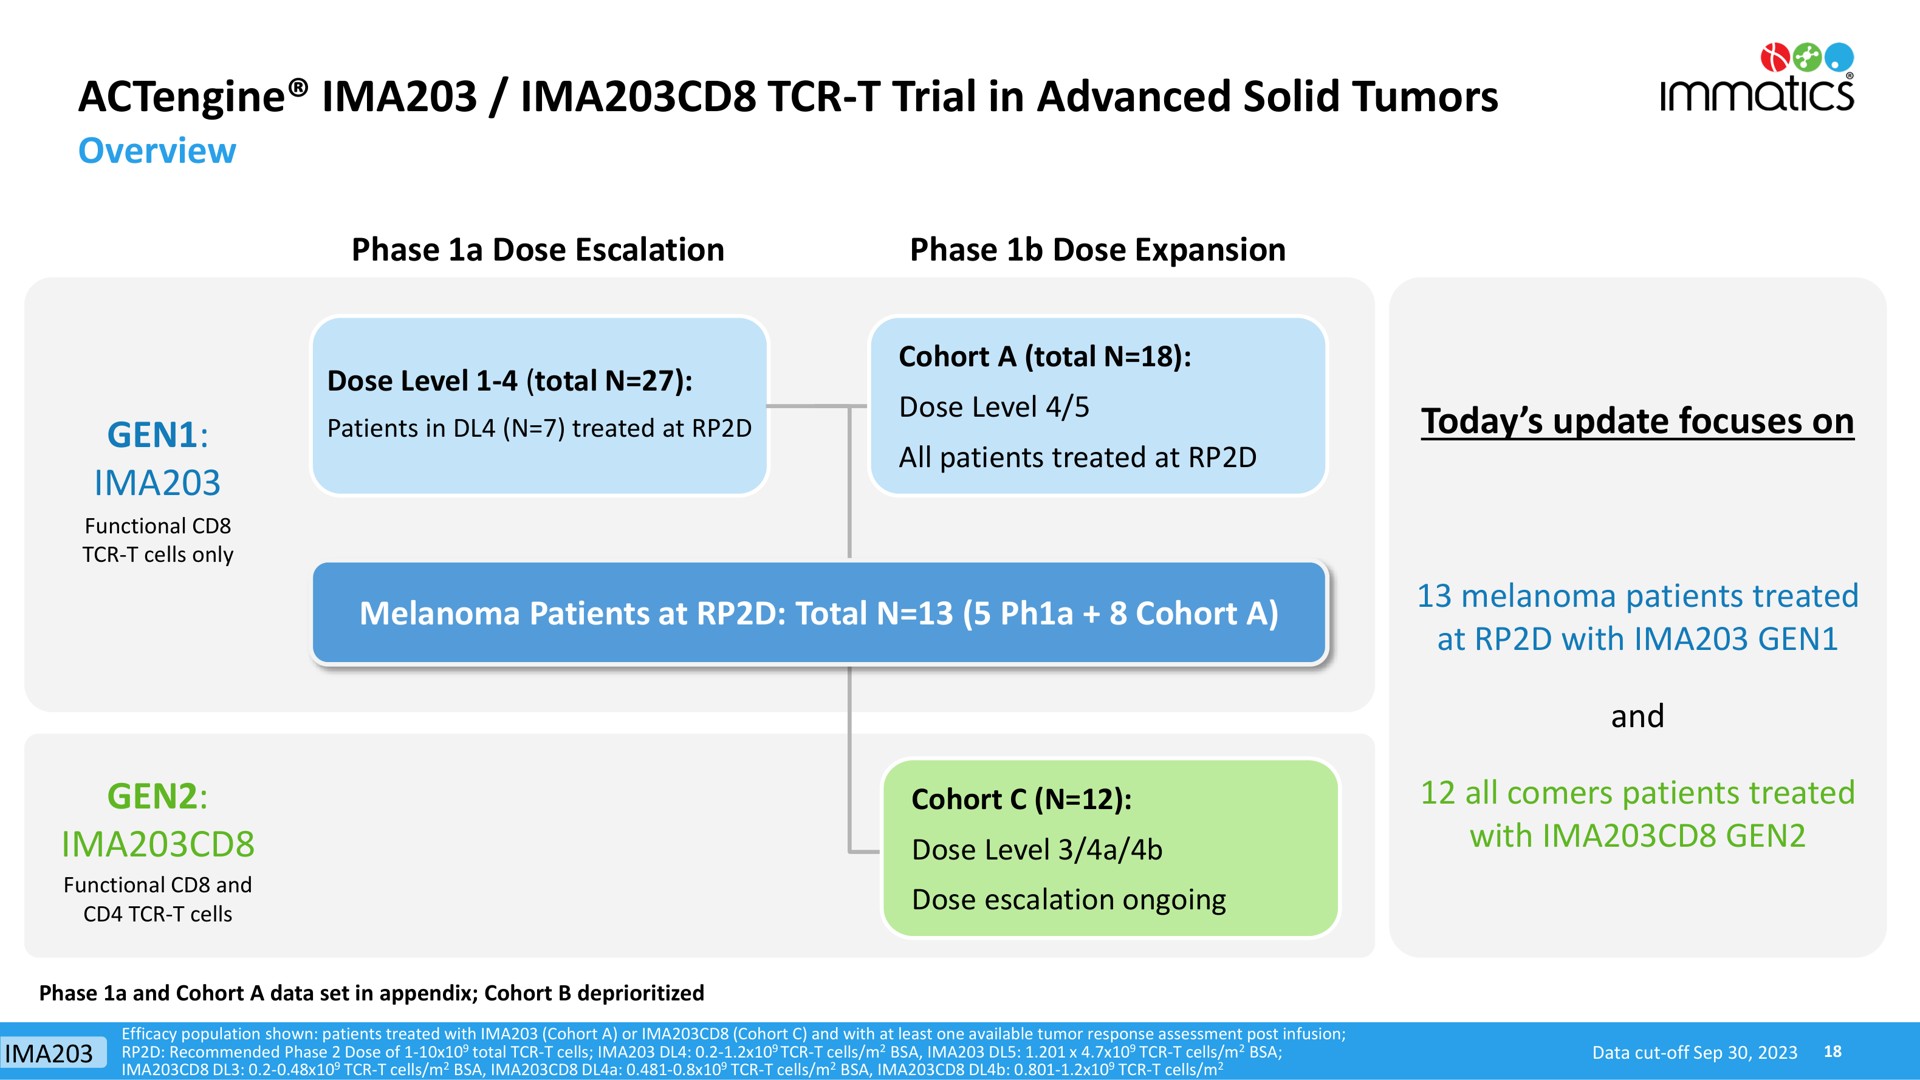 trial in advanced solid tumors melanoma patients at total cohort a melanoma patients treated at with gen | Immatics